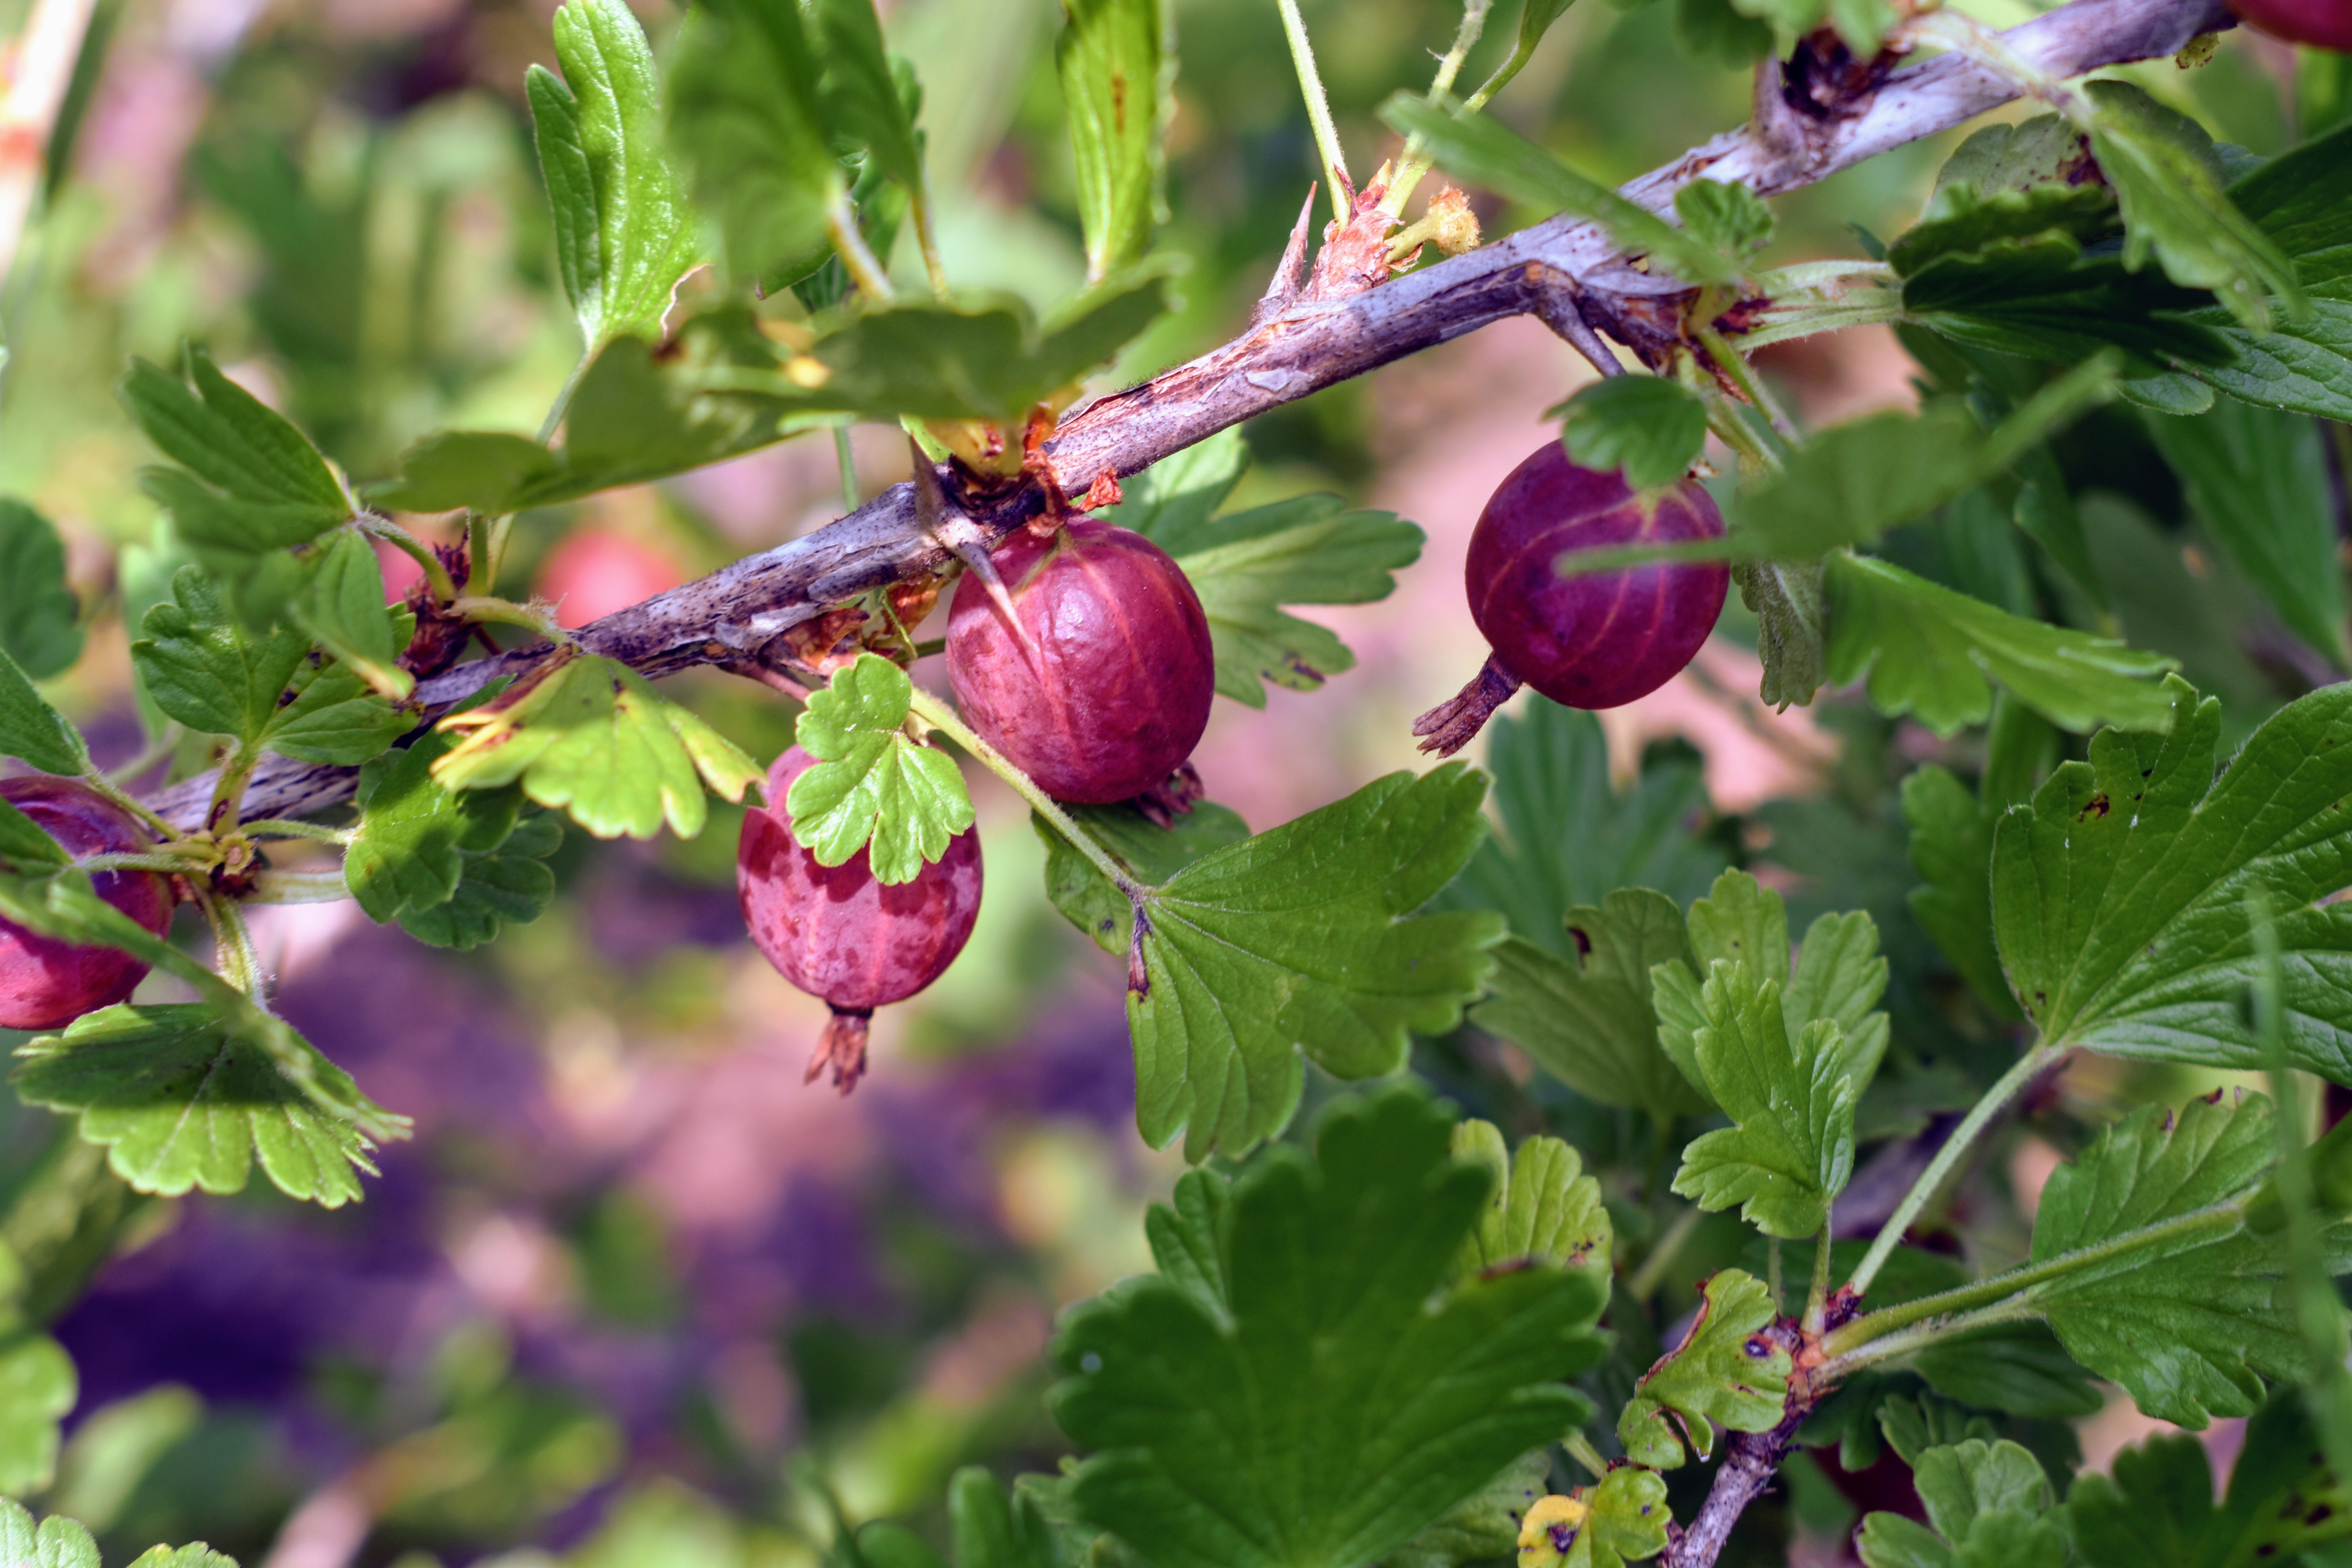 Picking Gooseberries and Currants at the Farm - The Martha Stewart Blog